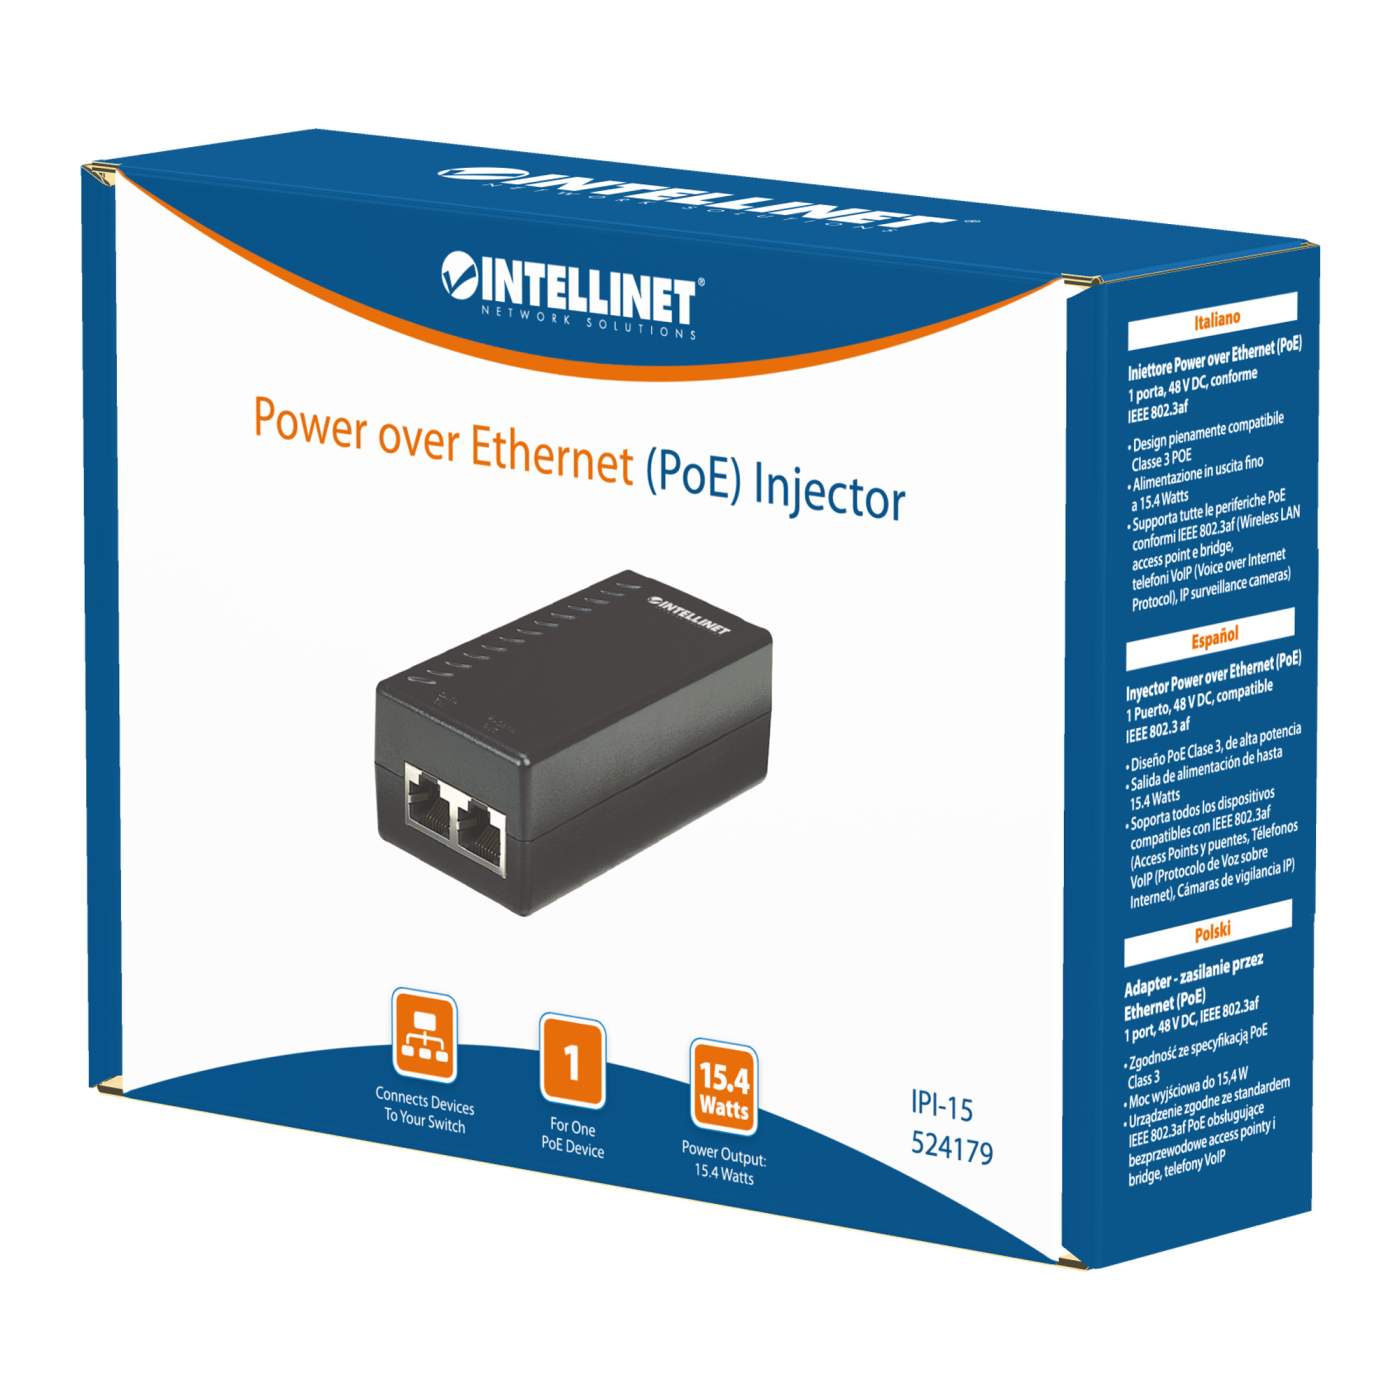 Power over Ethernet (PoE) Injector Packaging Image 2